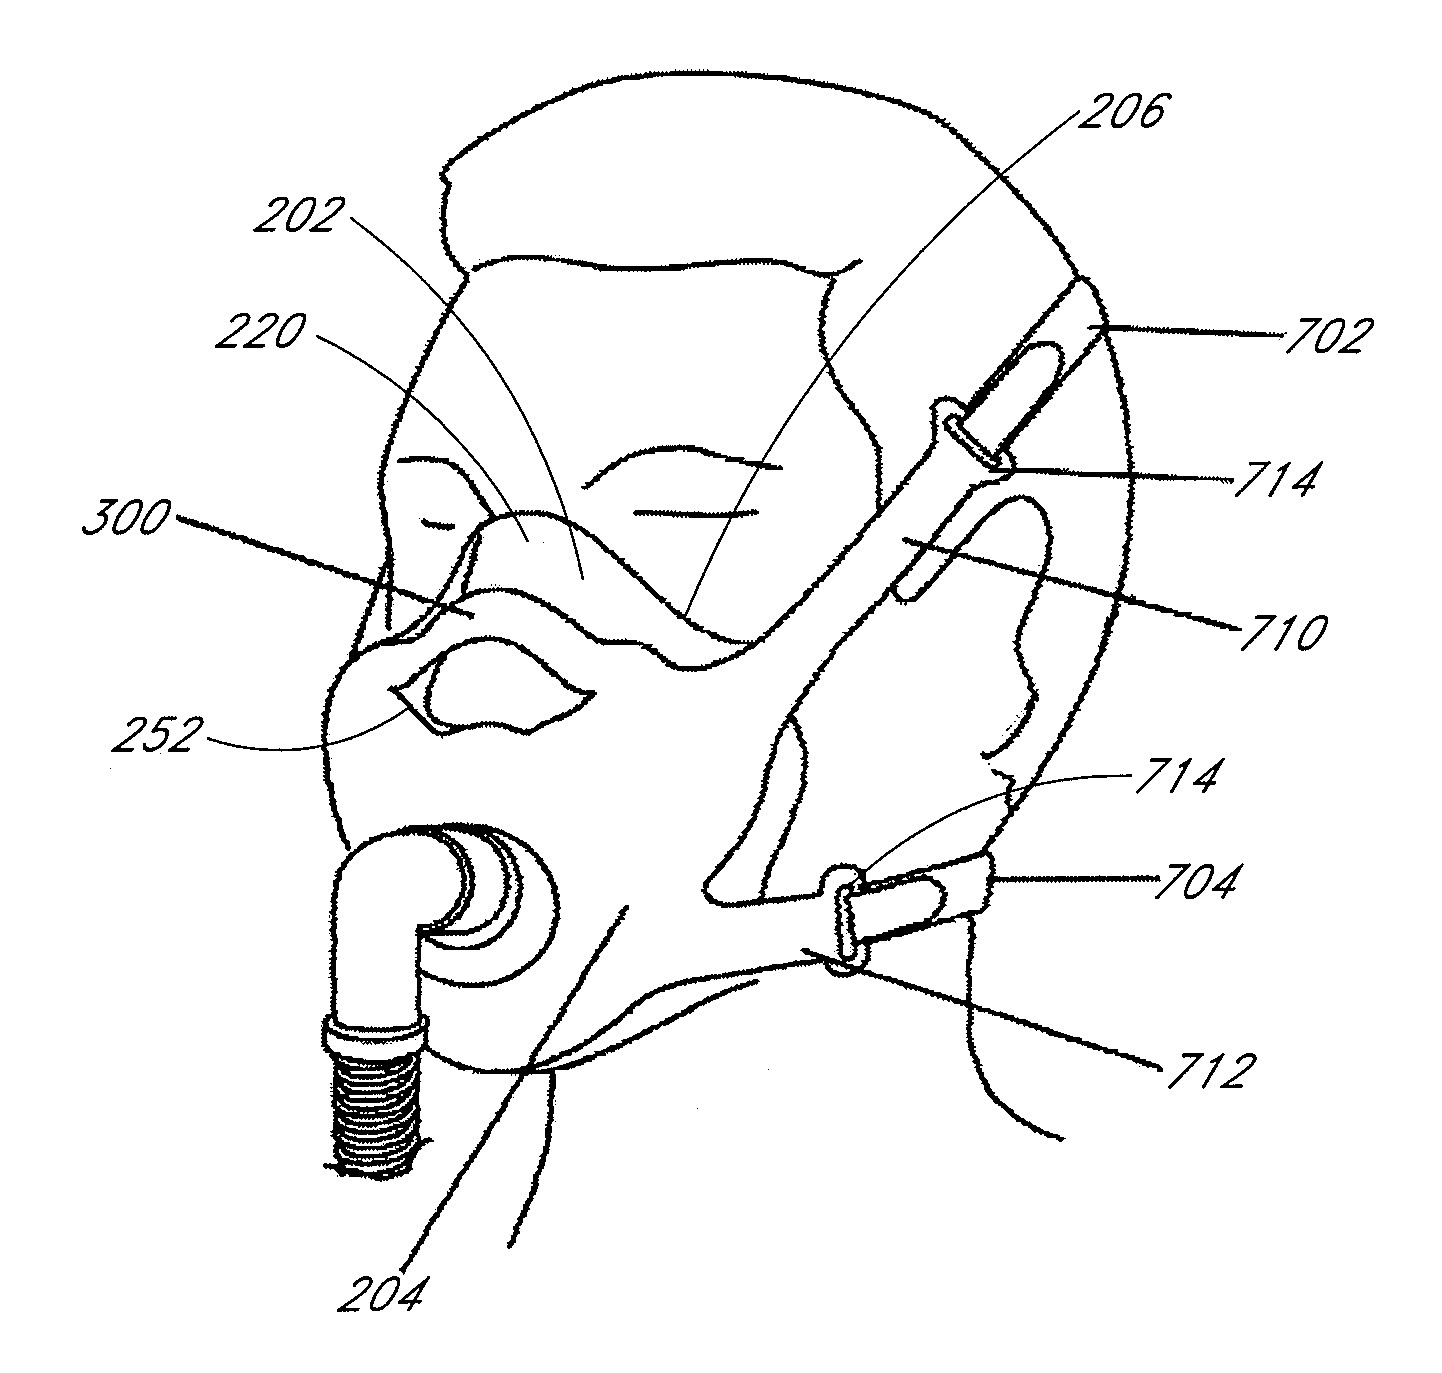 Patient interface and headgear